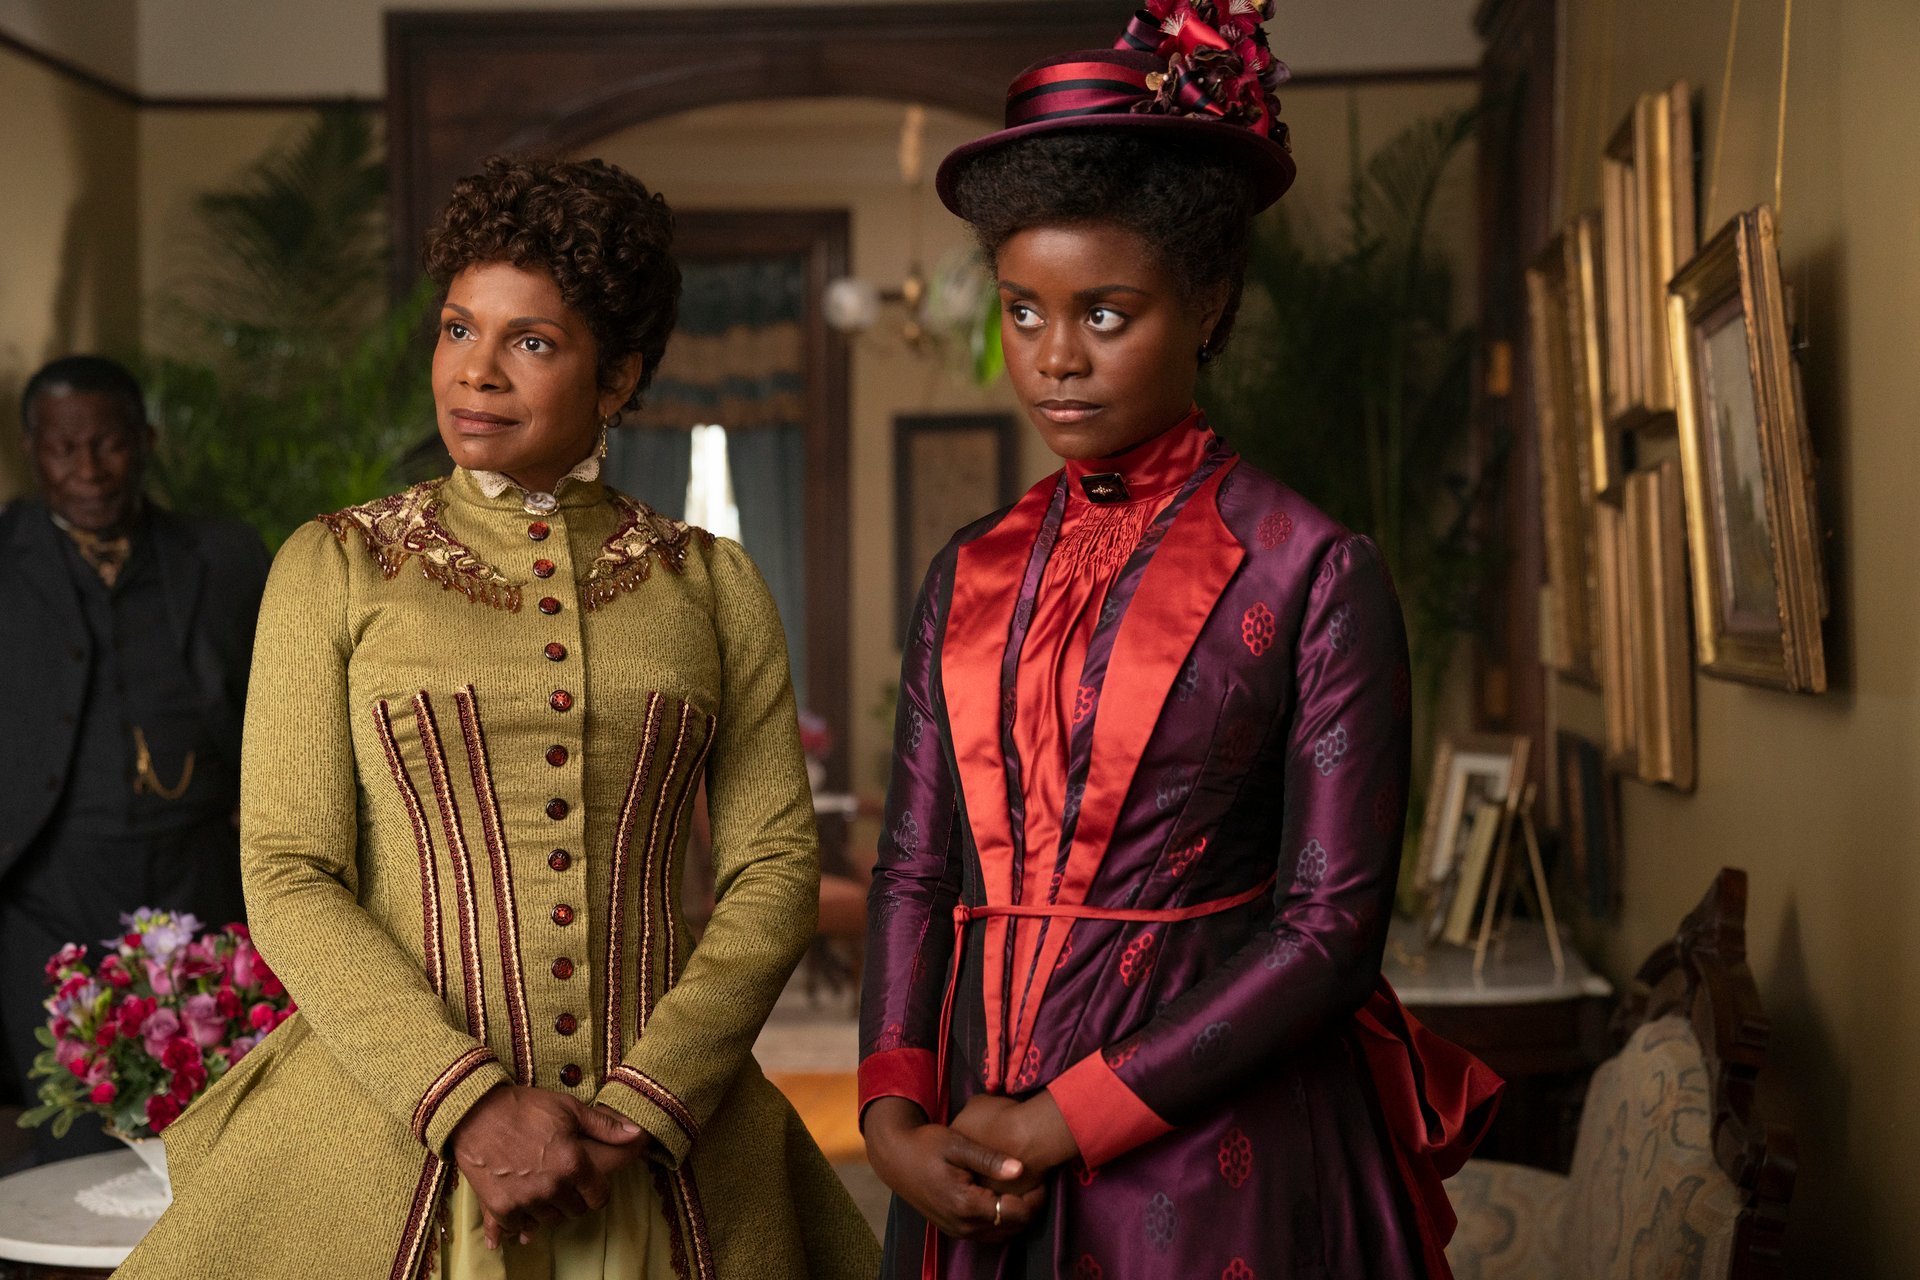 Audra McDonald, in an olive dress, and Denee Barton, in a purple dress and hat, in an episode of 'The Gilded Age' 